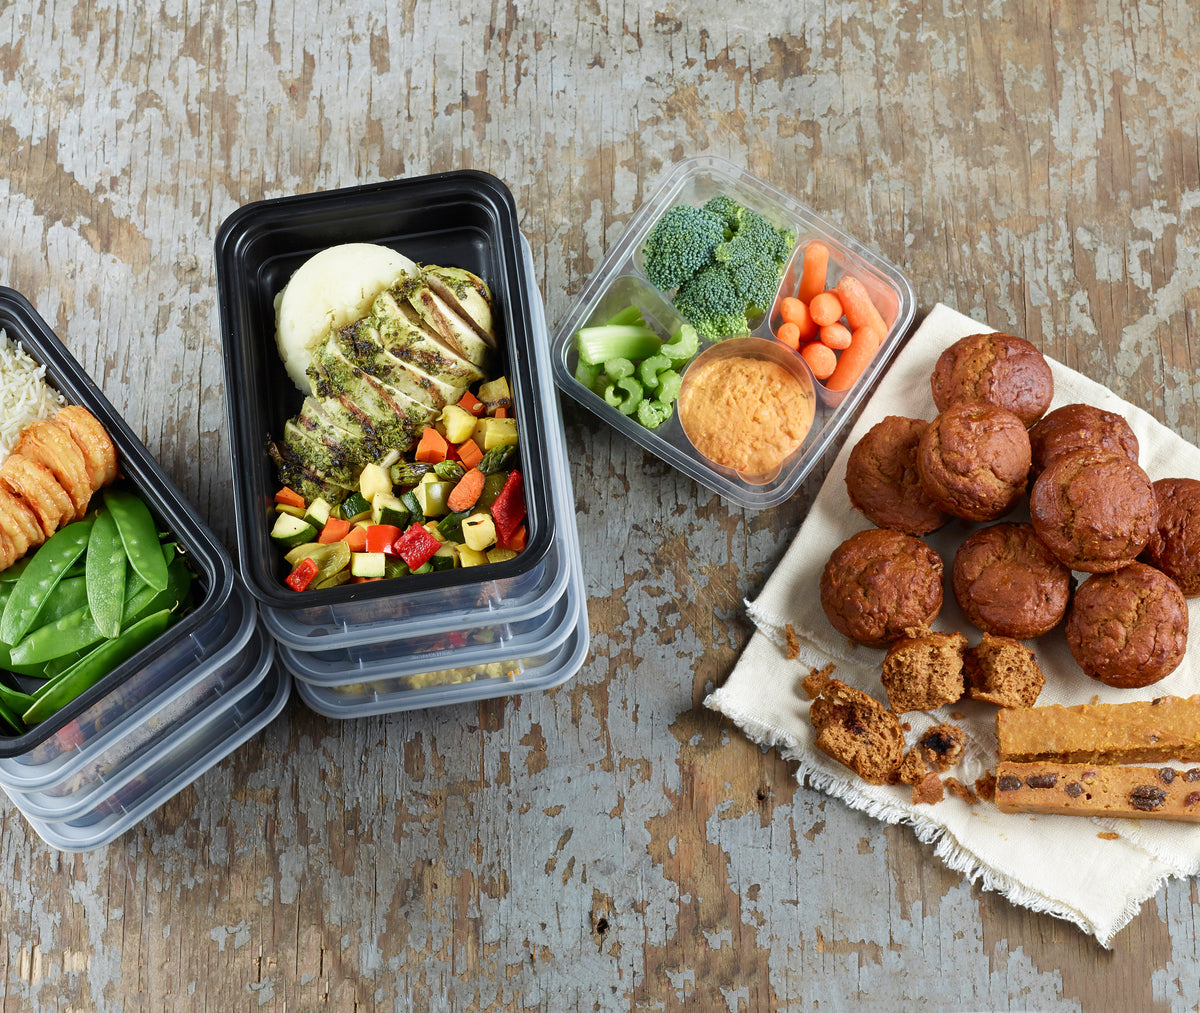 Meal Prep»: how to make your daily life easier! - Monbento